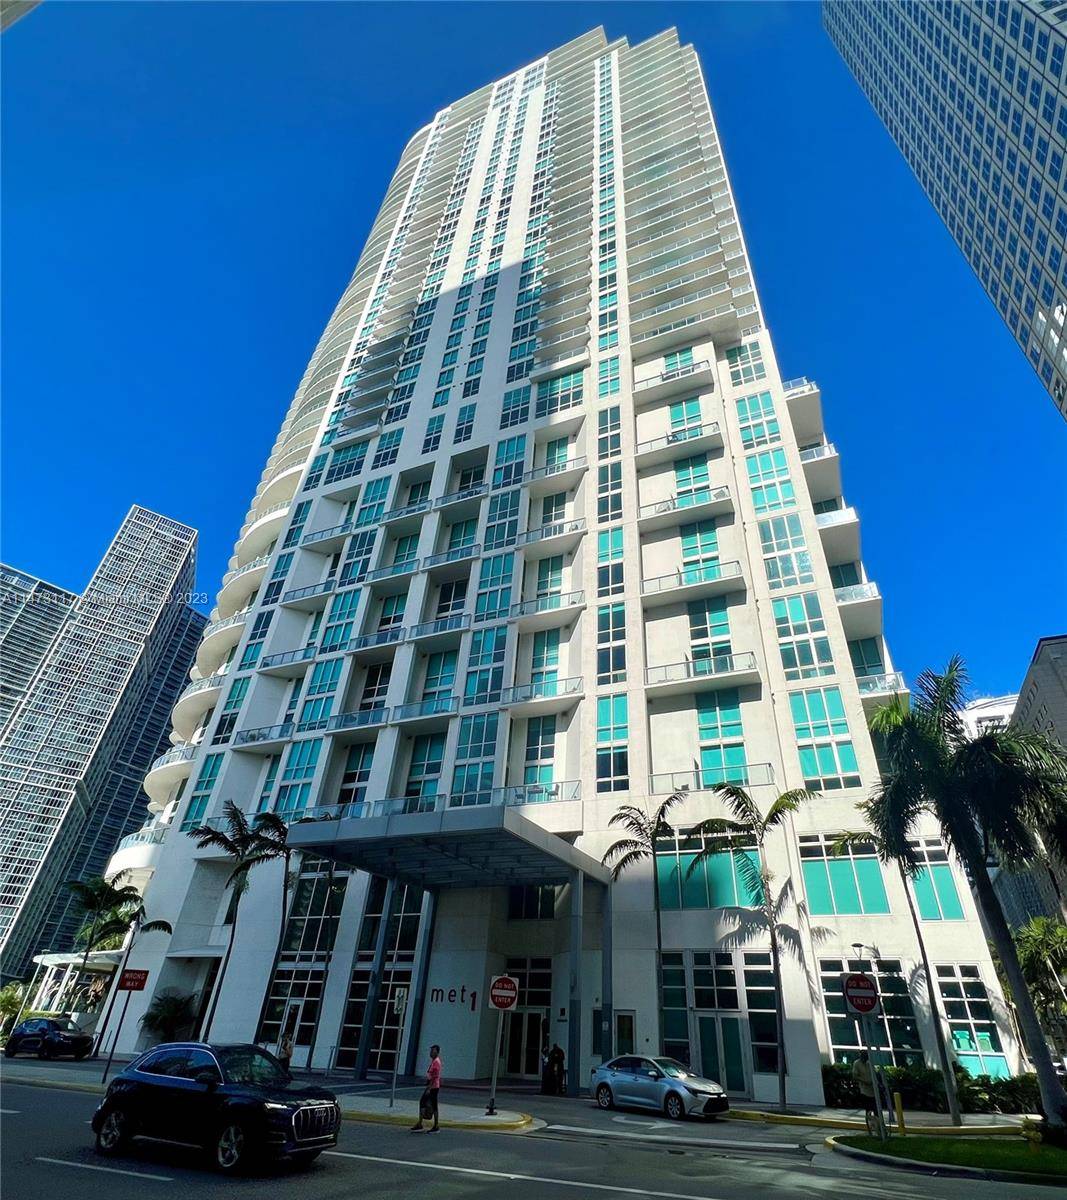 Luxurious Downtown Miami Penthouse offers the epitome of urban luxury with 3 Bedrooms, 3.